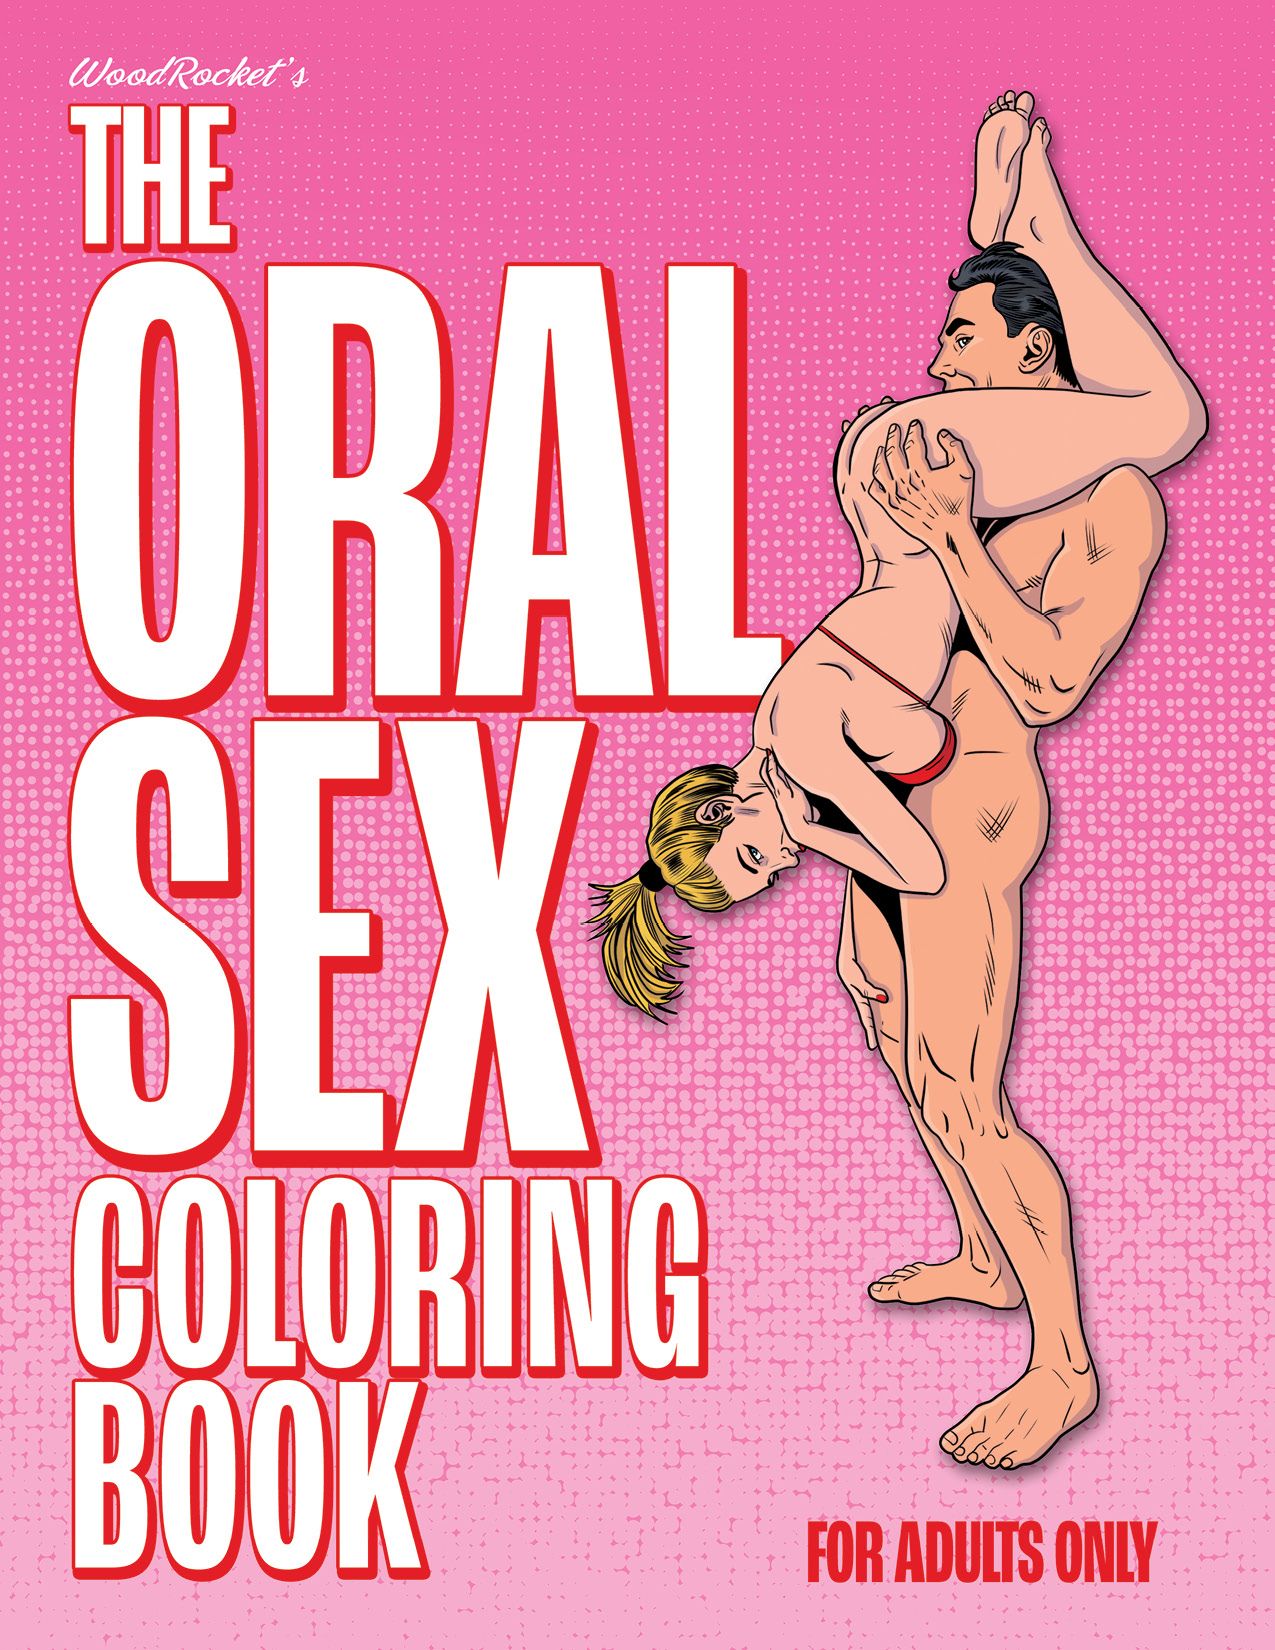 THE ORAL SEX COLORING BOOK (NET)